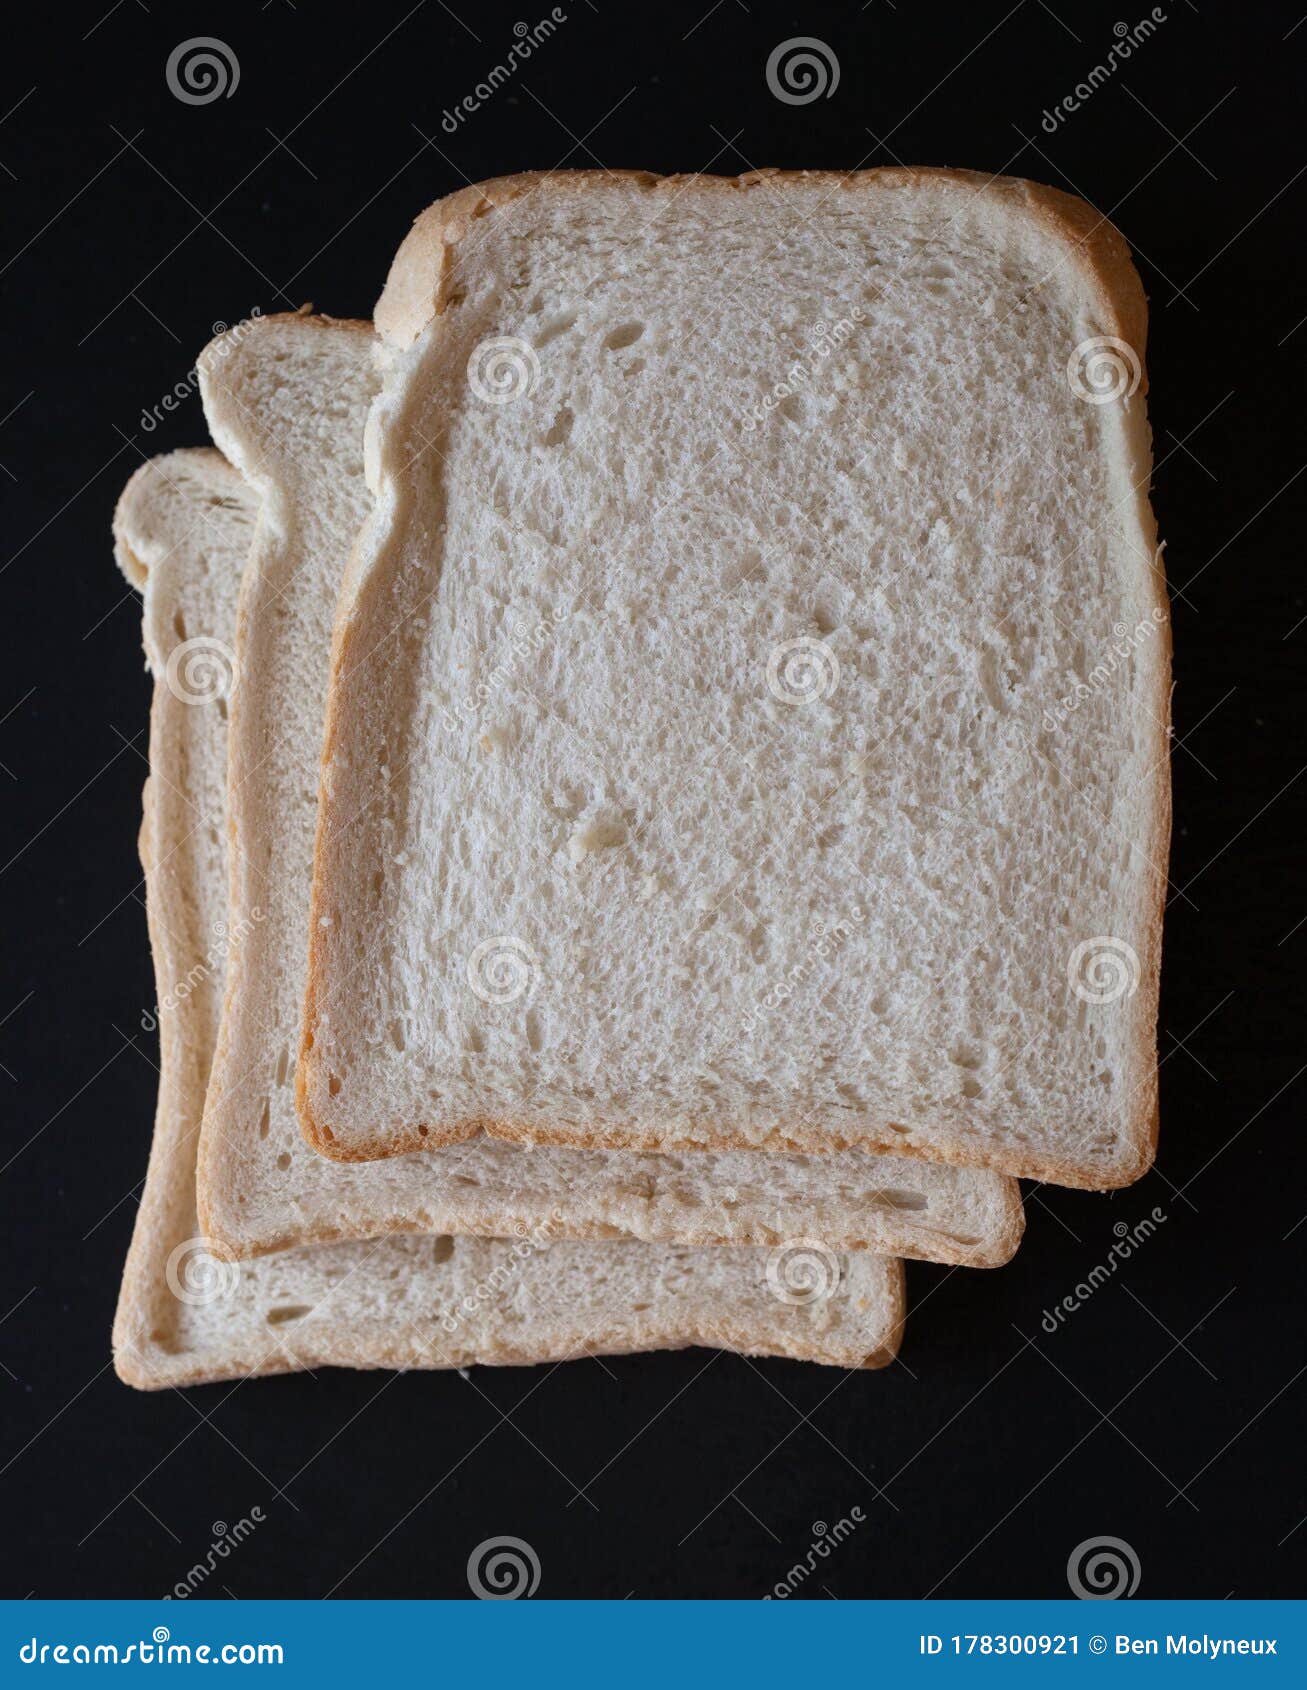 slices of white bread on a black background